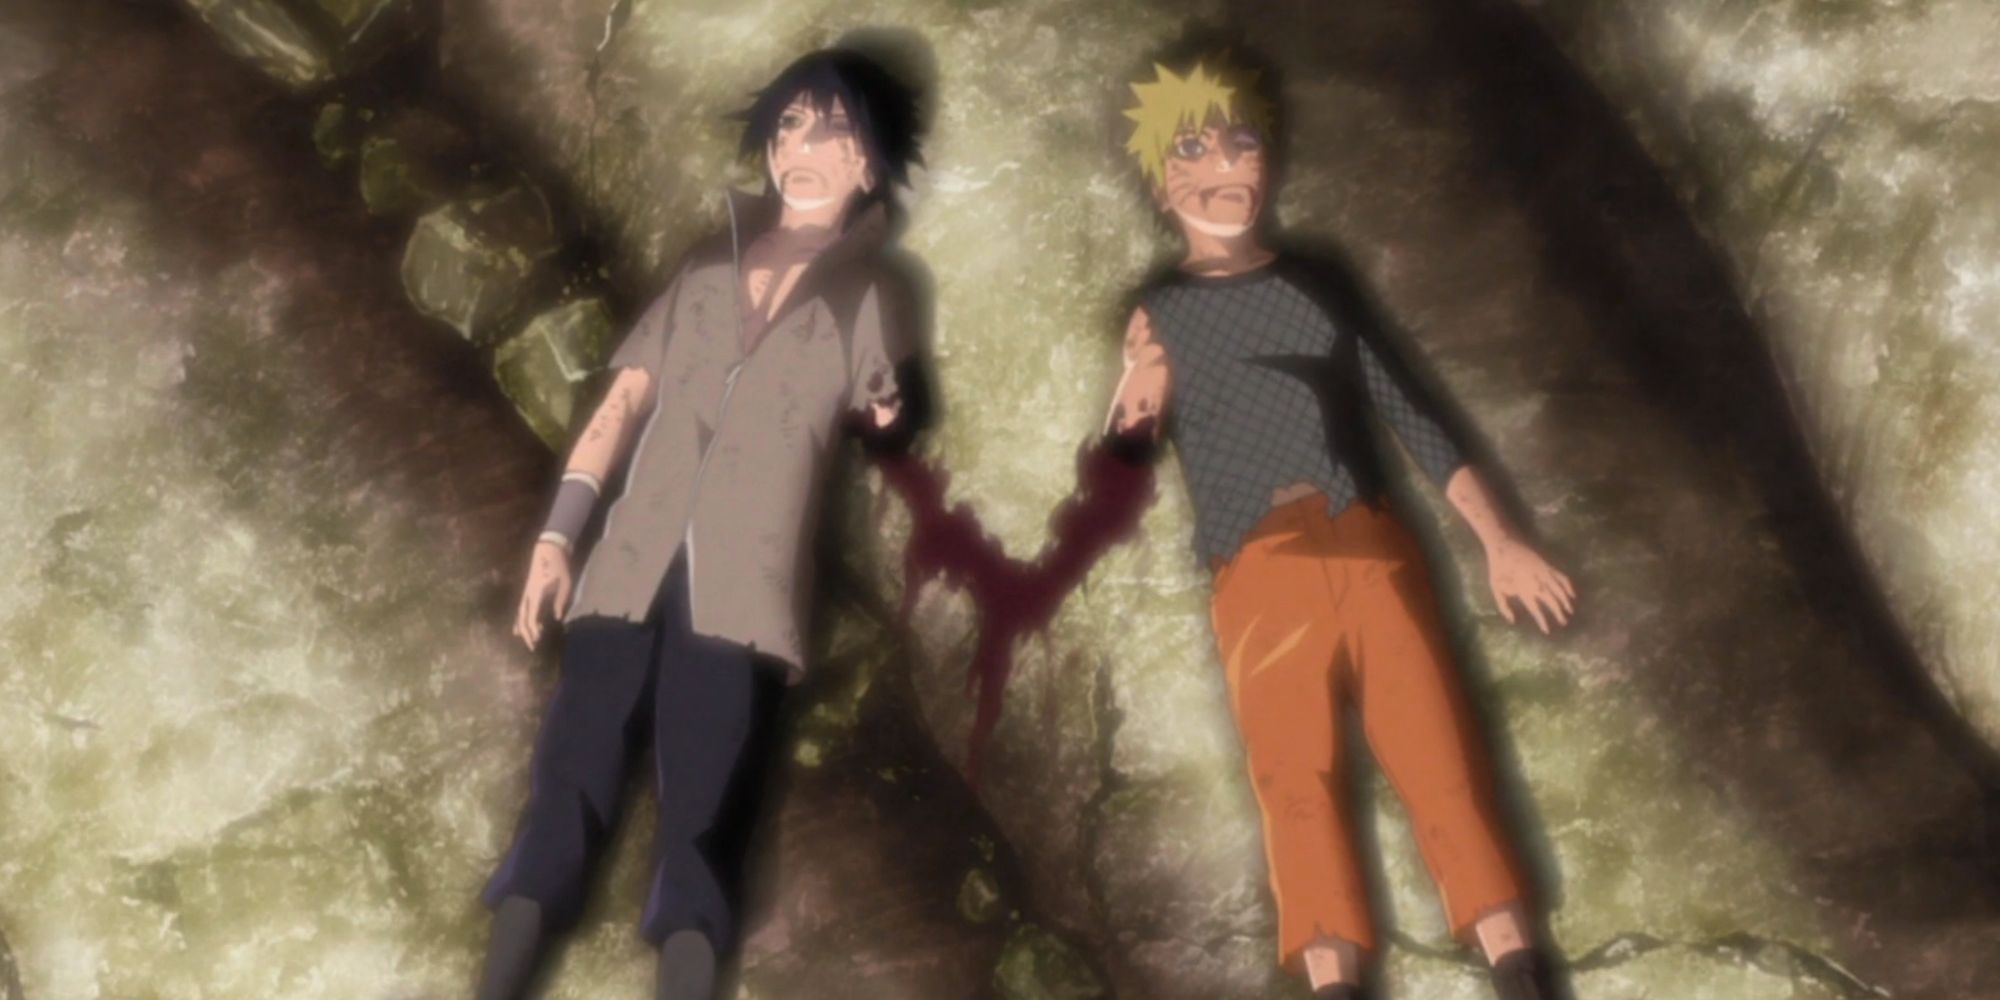 Sasuke and Naruto lay on the ground after their fight, missing limbs, inNaruto Shippuden The Unison Sign Episode 478